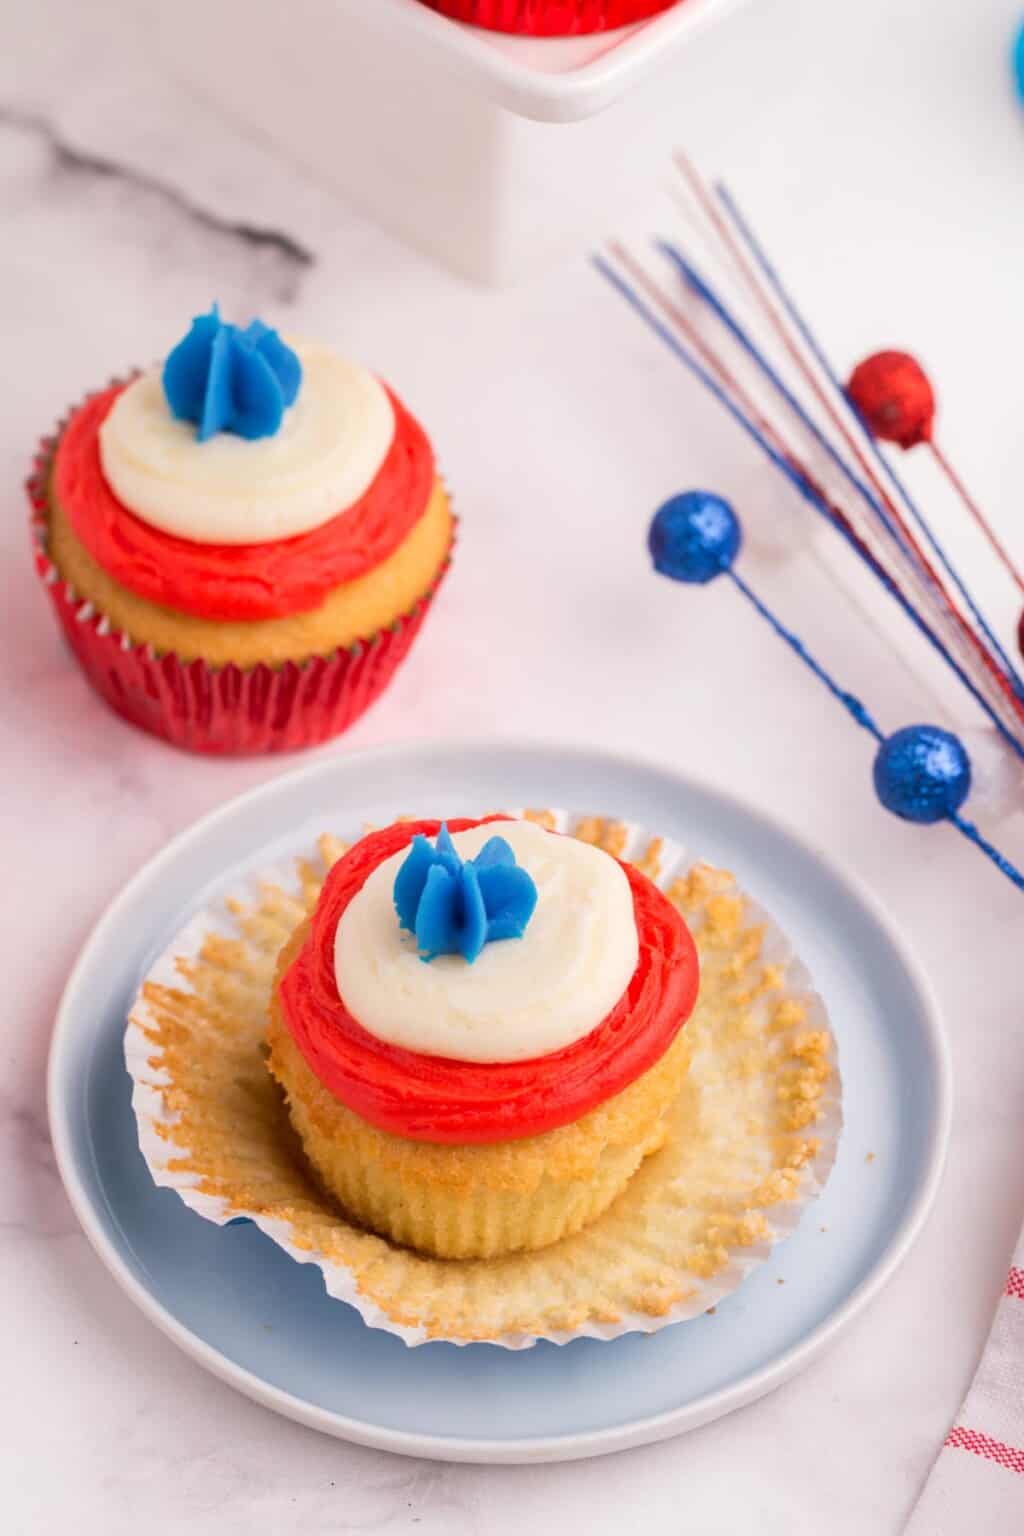 Gluten Free 4th of July Cupcakes - an easy Red, White, and Blue Dessert!